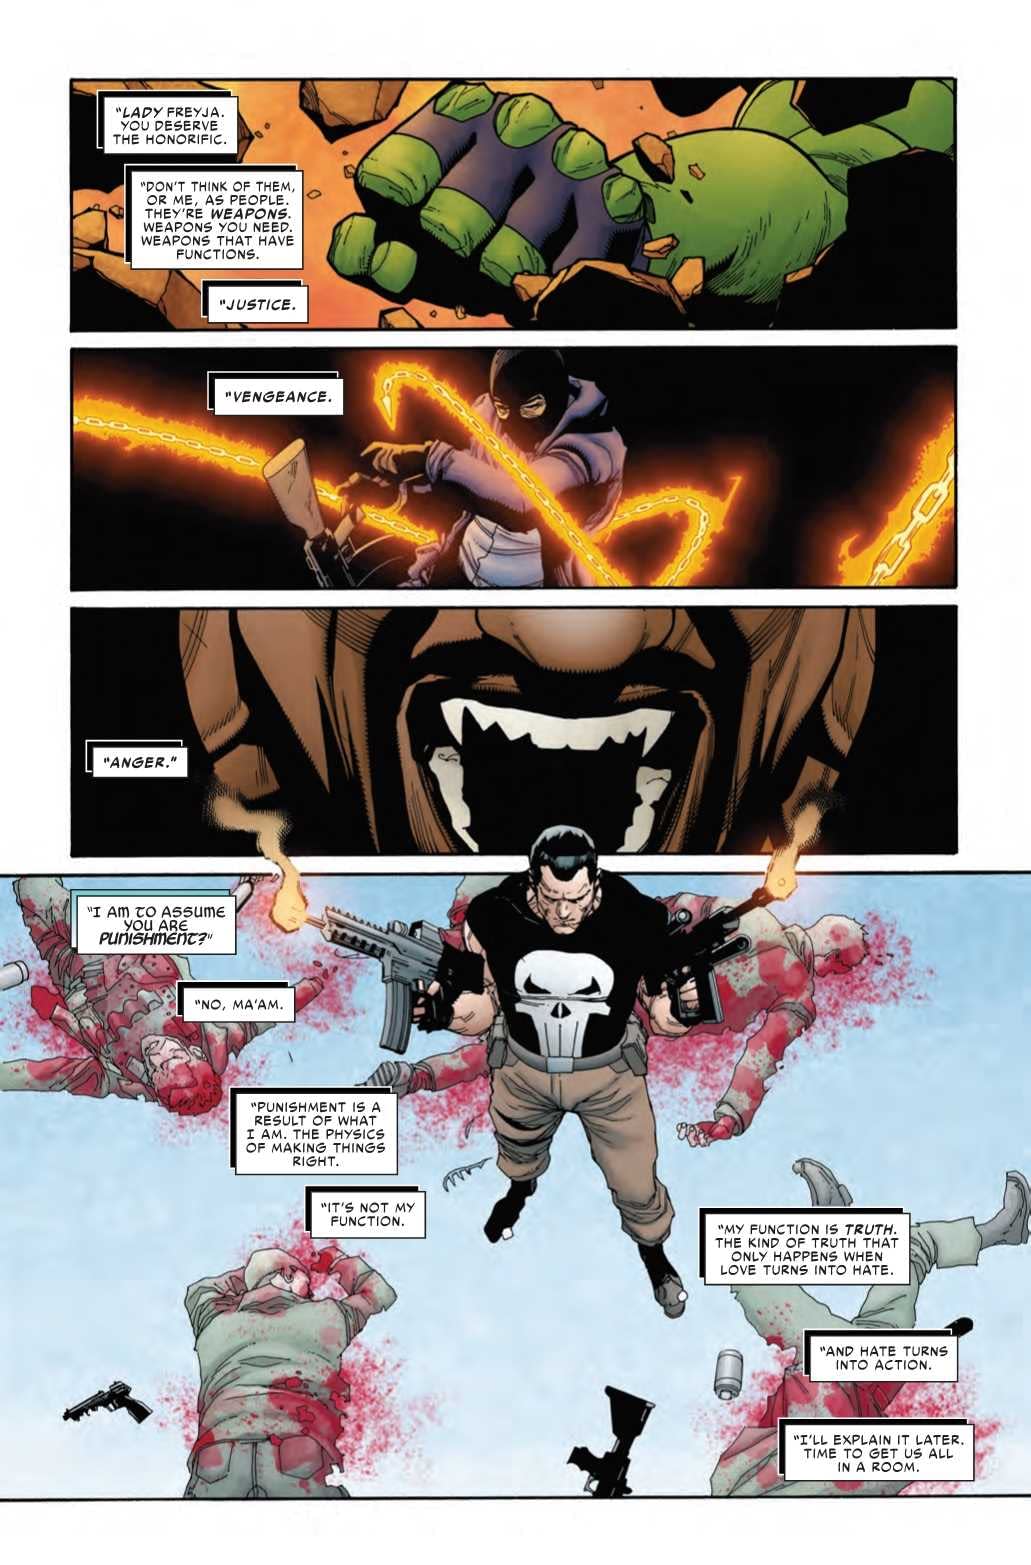 The Punisher Channels Yoda in War of the Realms Strikeforce Dark Elf Realm #1 (Preview)